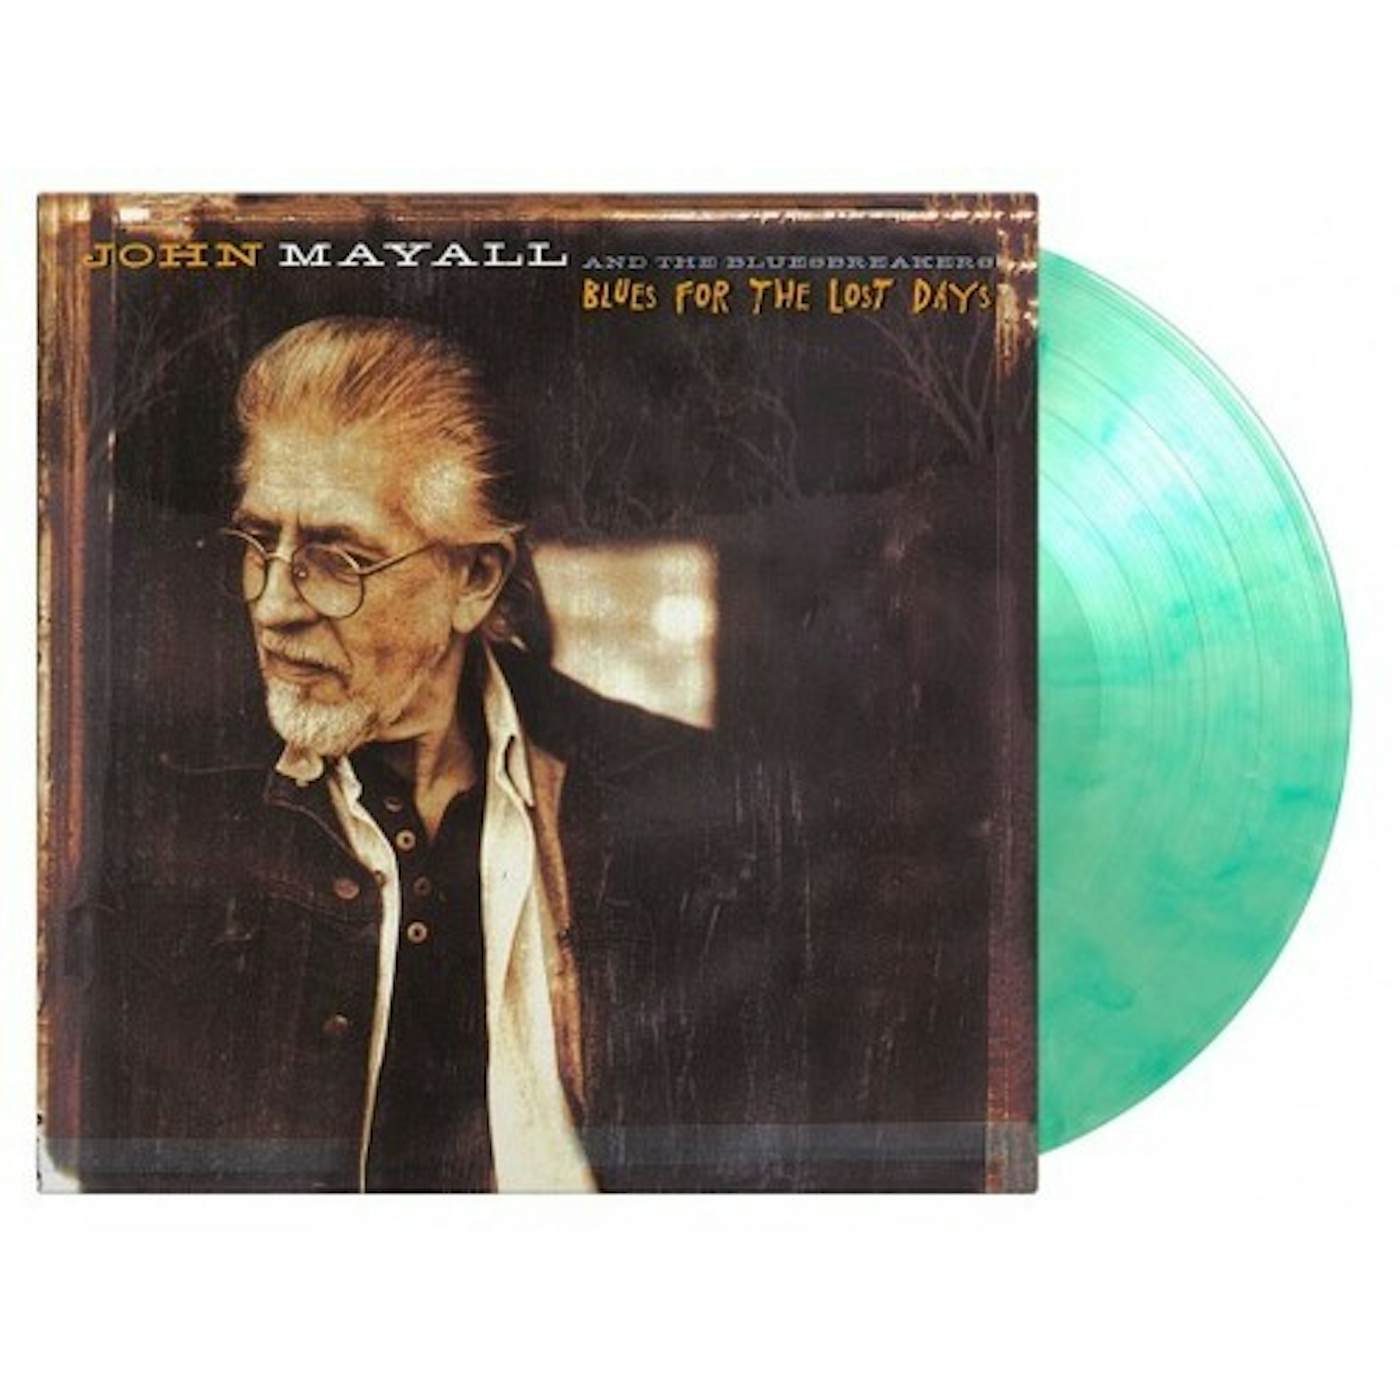 John Mayall & The Bluesbreakers Blues For The Lost Days Vinyl Record